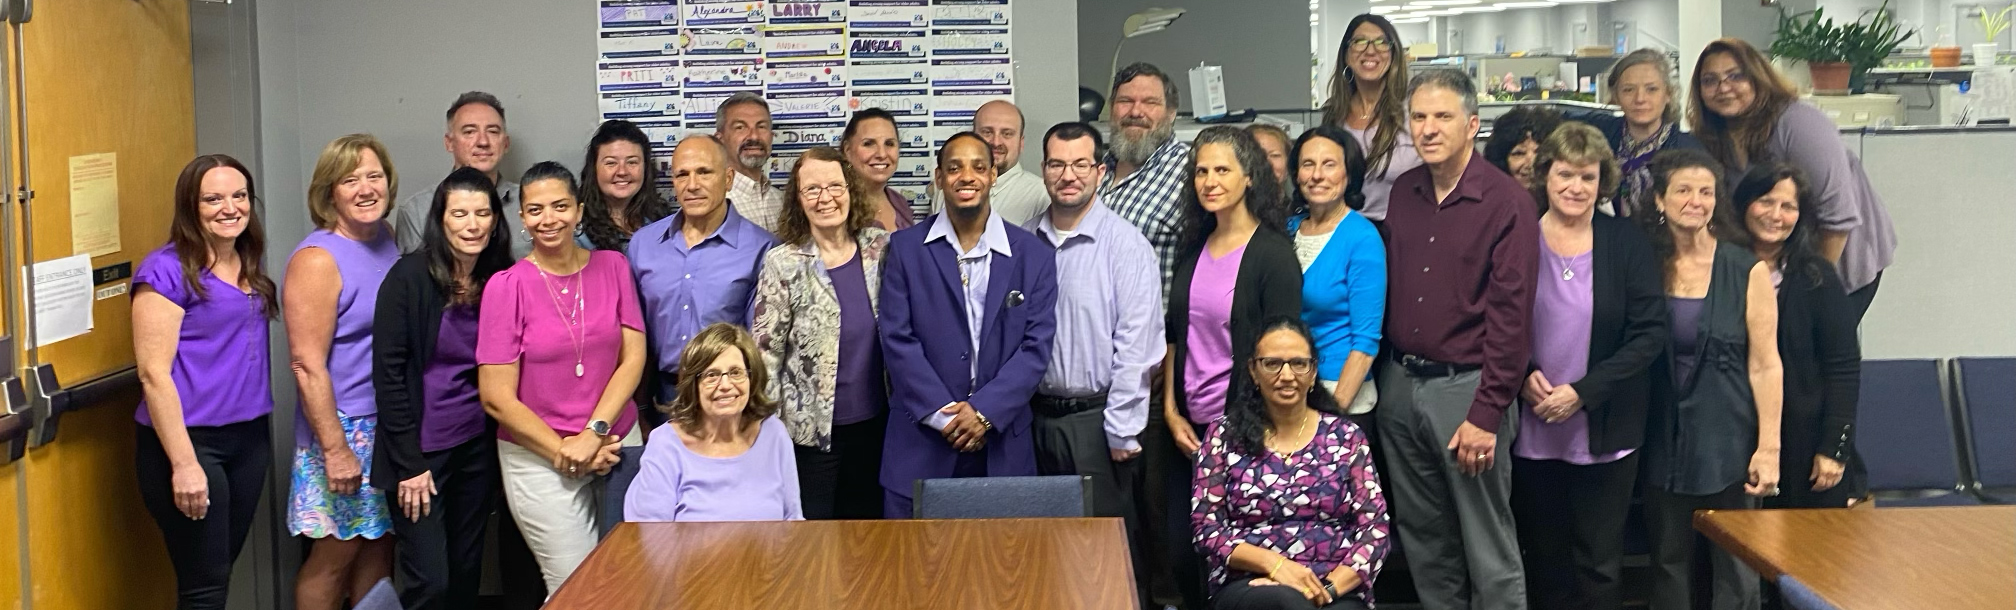 Suffolk County Office for the Aging showing support for World Elder Abuse Awareness Day